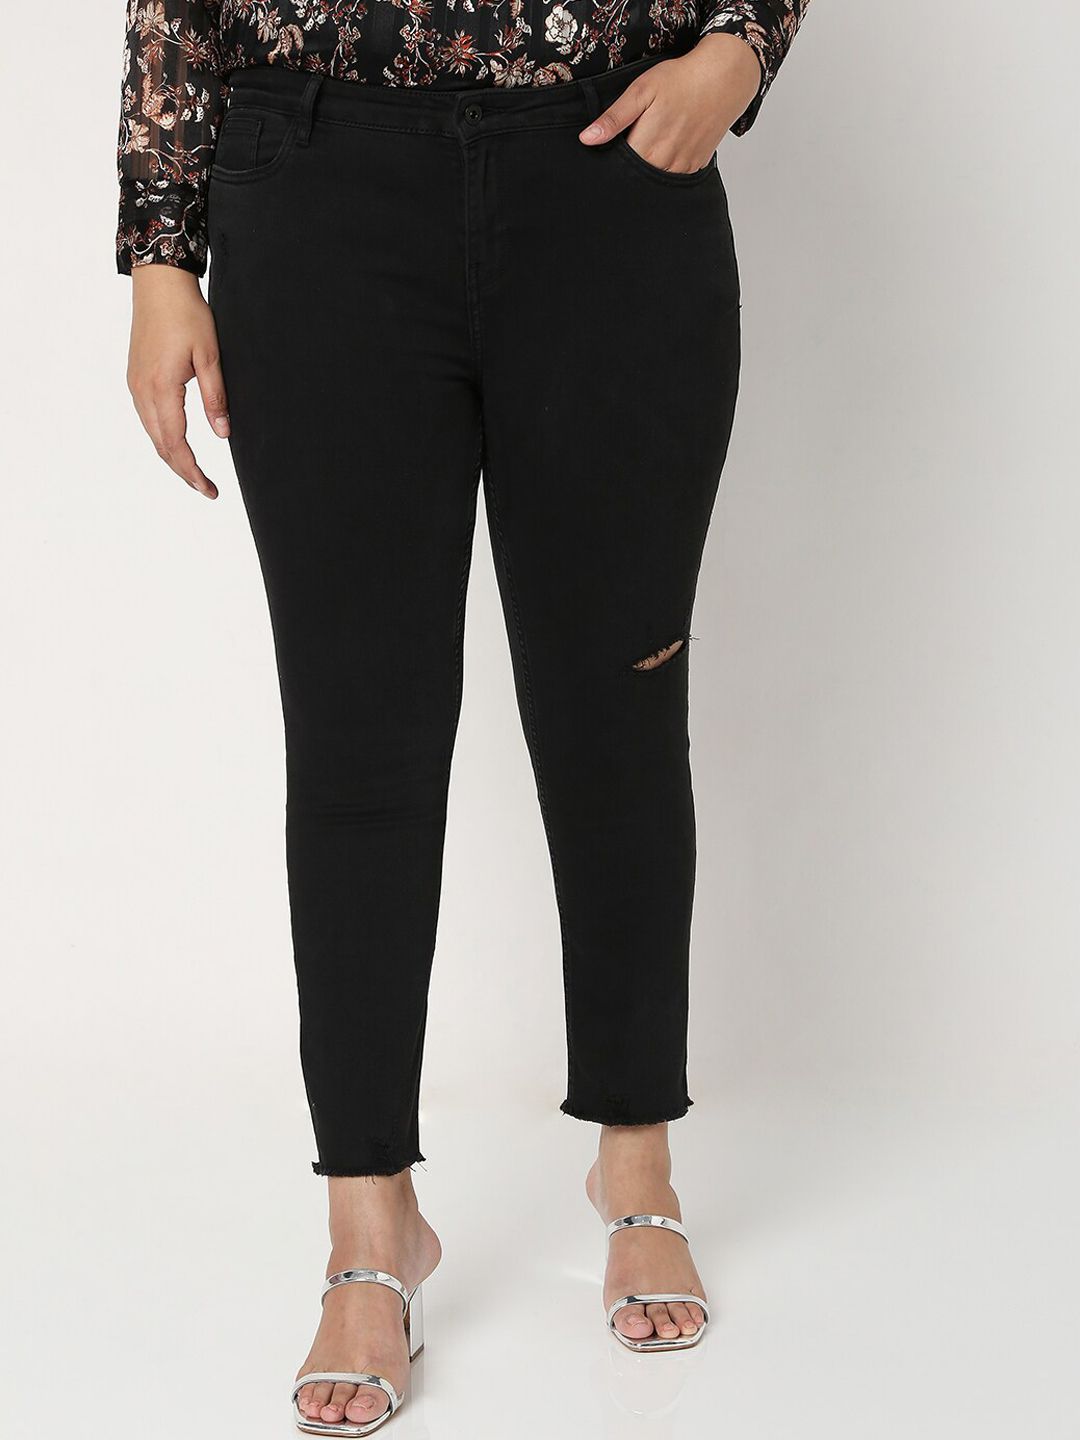 Vero Moda Women Black High-Rise Mildly Distressed Stretchable Jeans Price in India